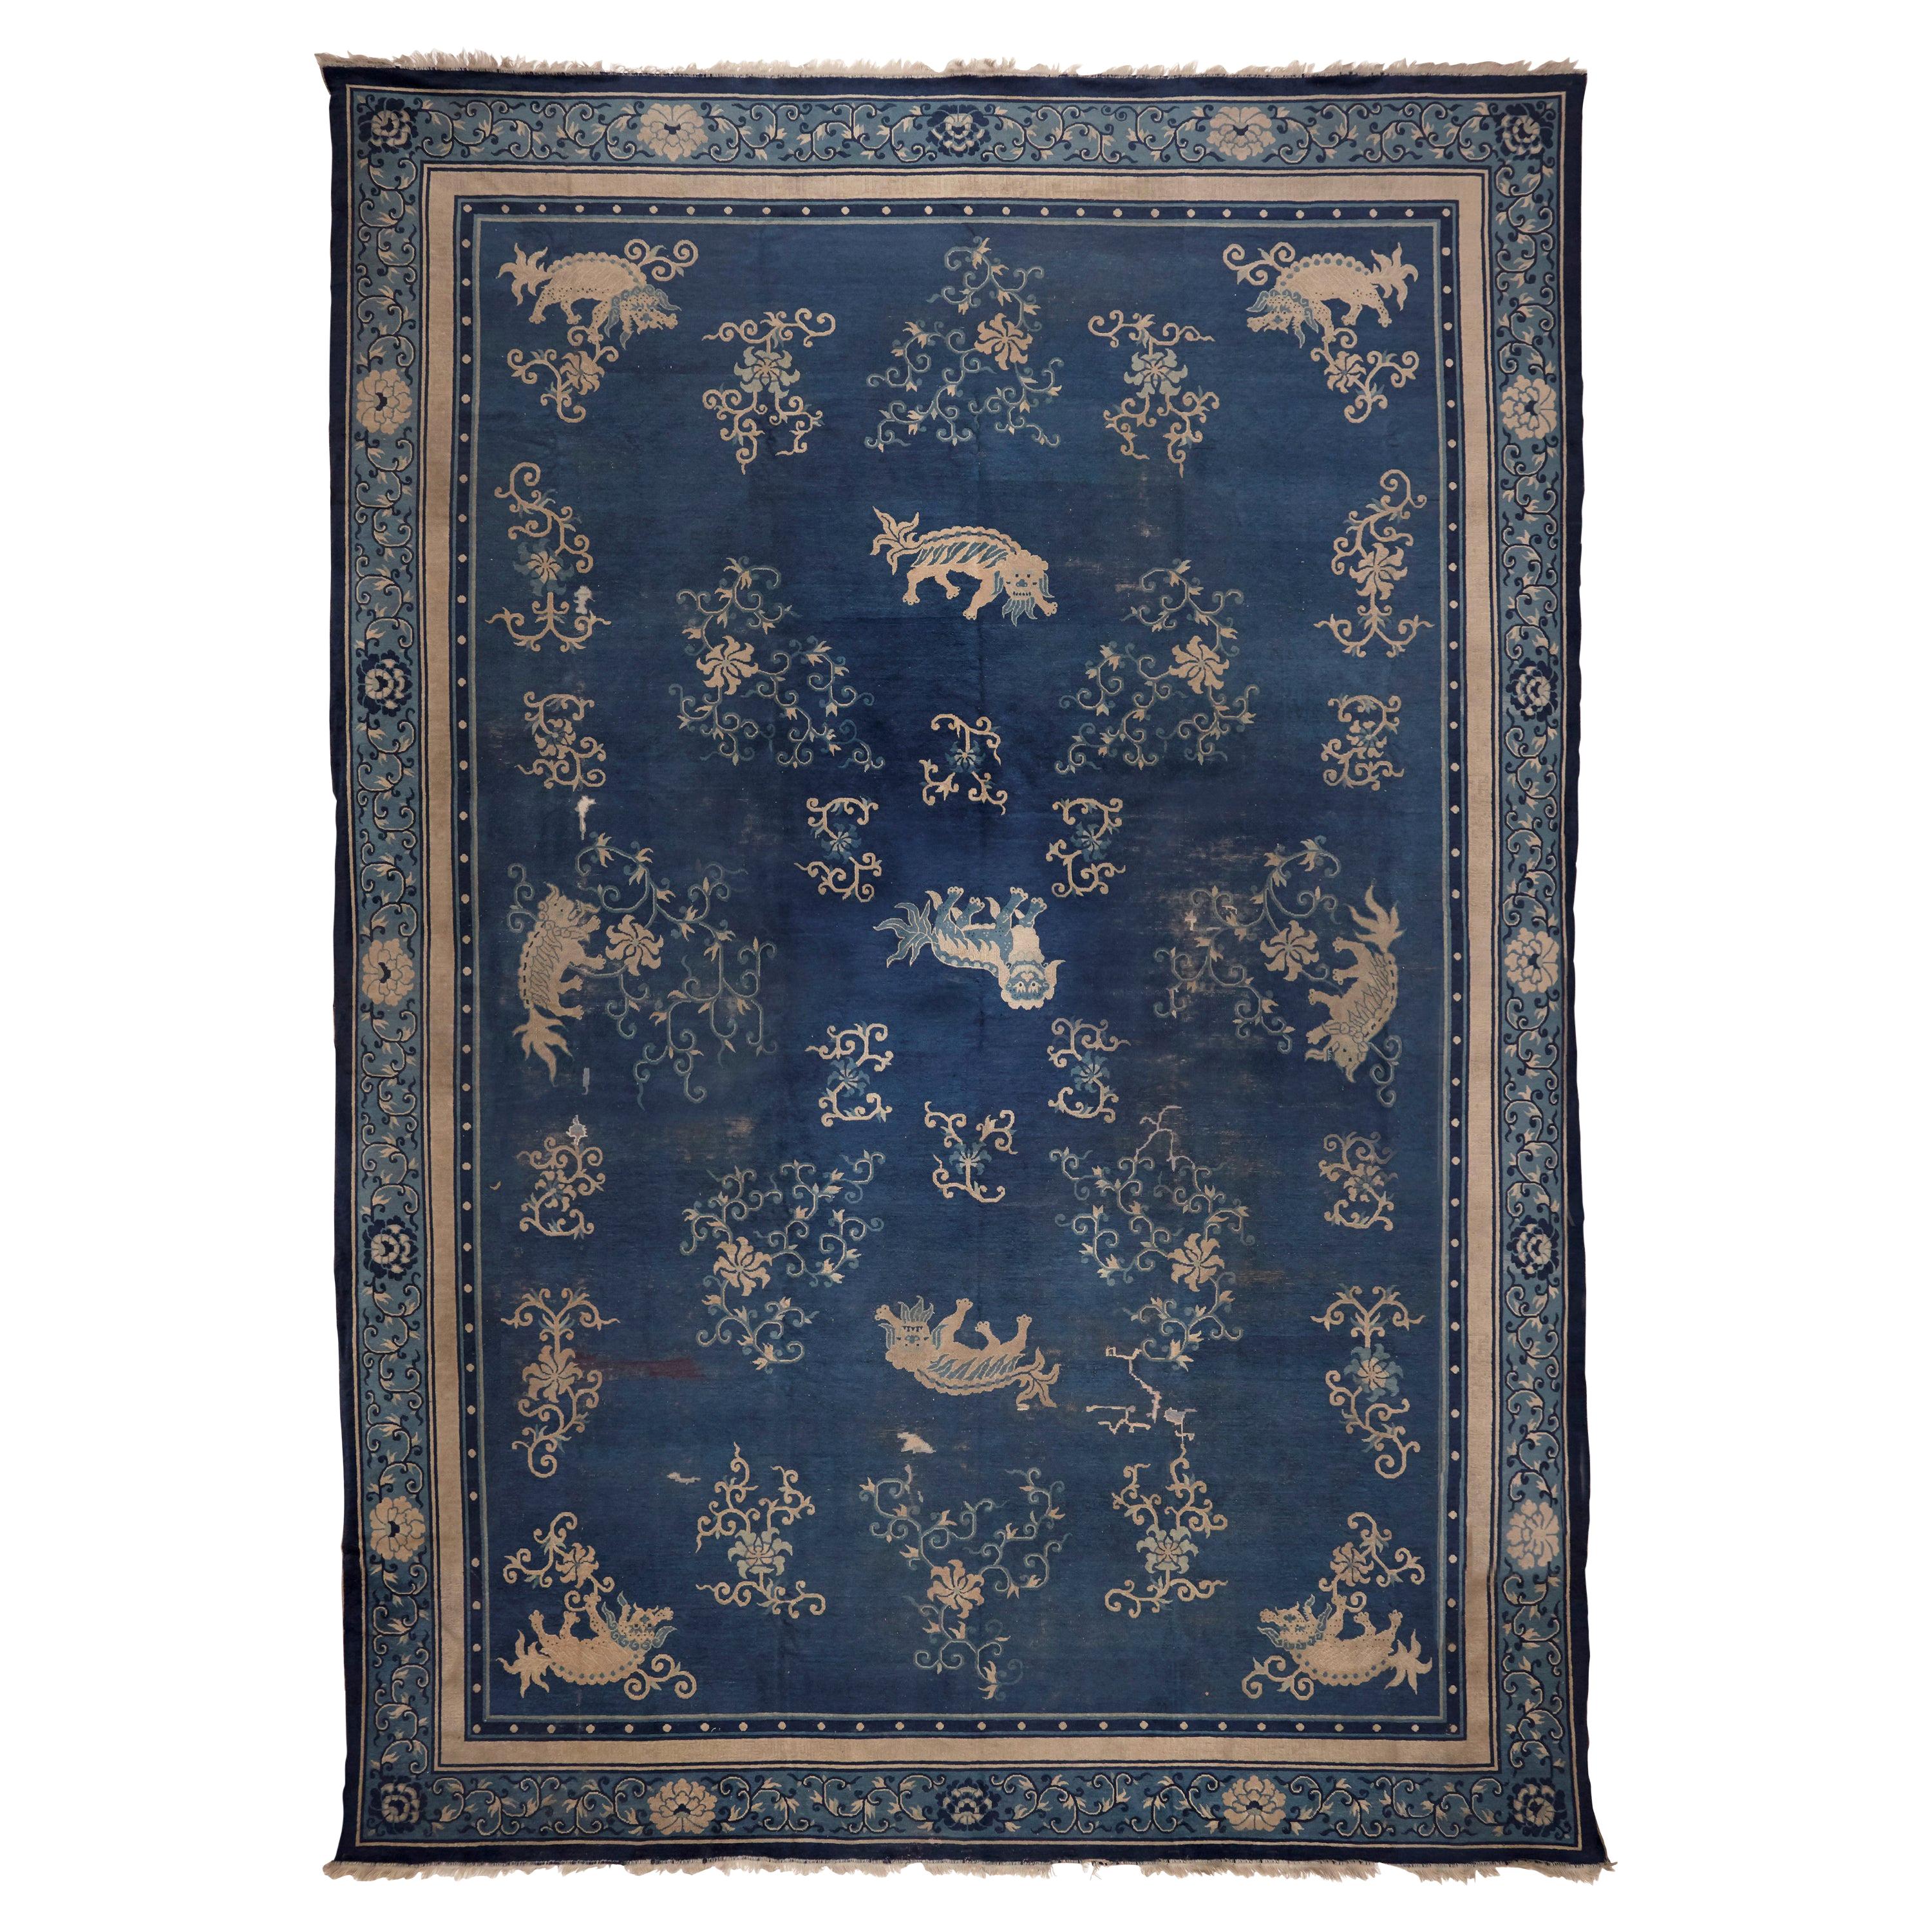 Ningshia, Chinese Export, Hand Knotted Wool, Antique Rug, circa 1920